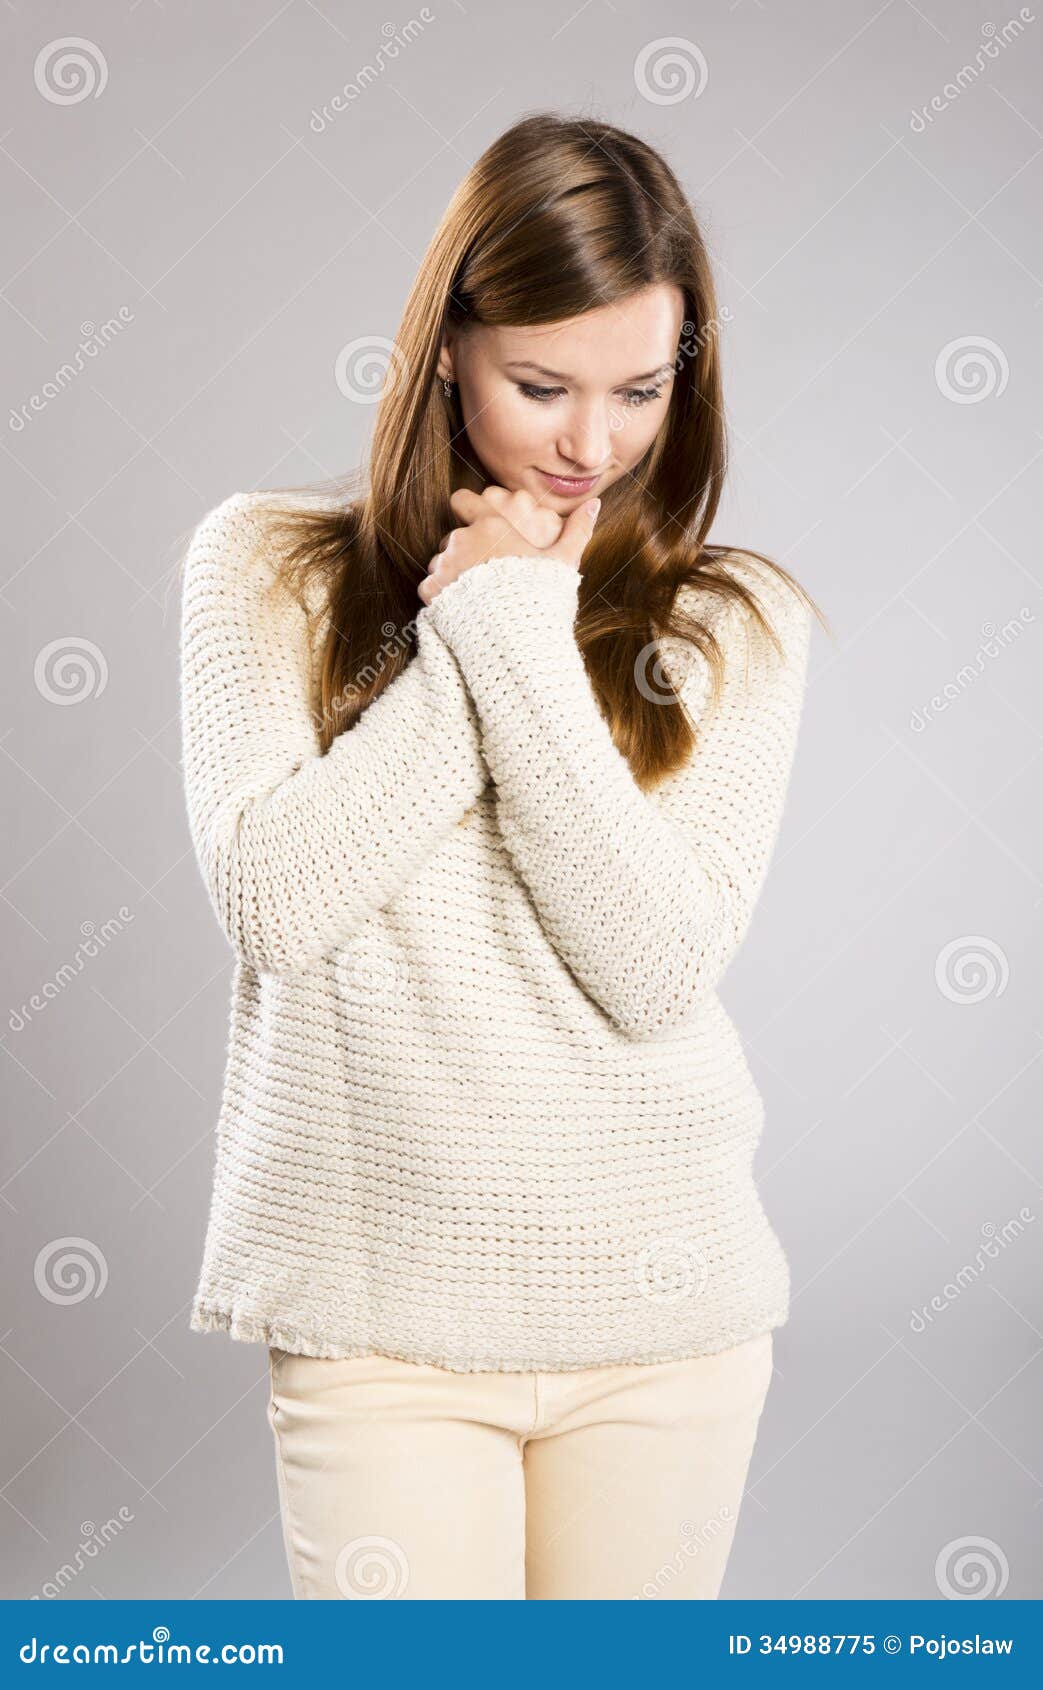 Pretty girls in sweaters for women images